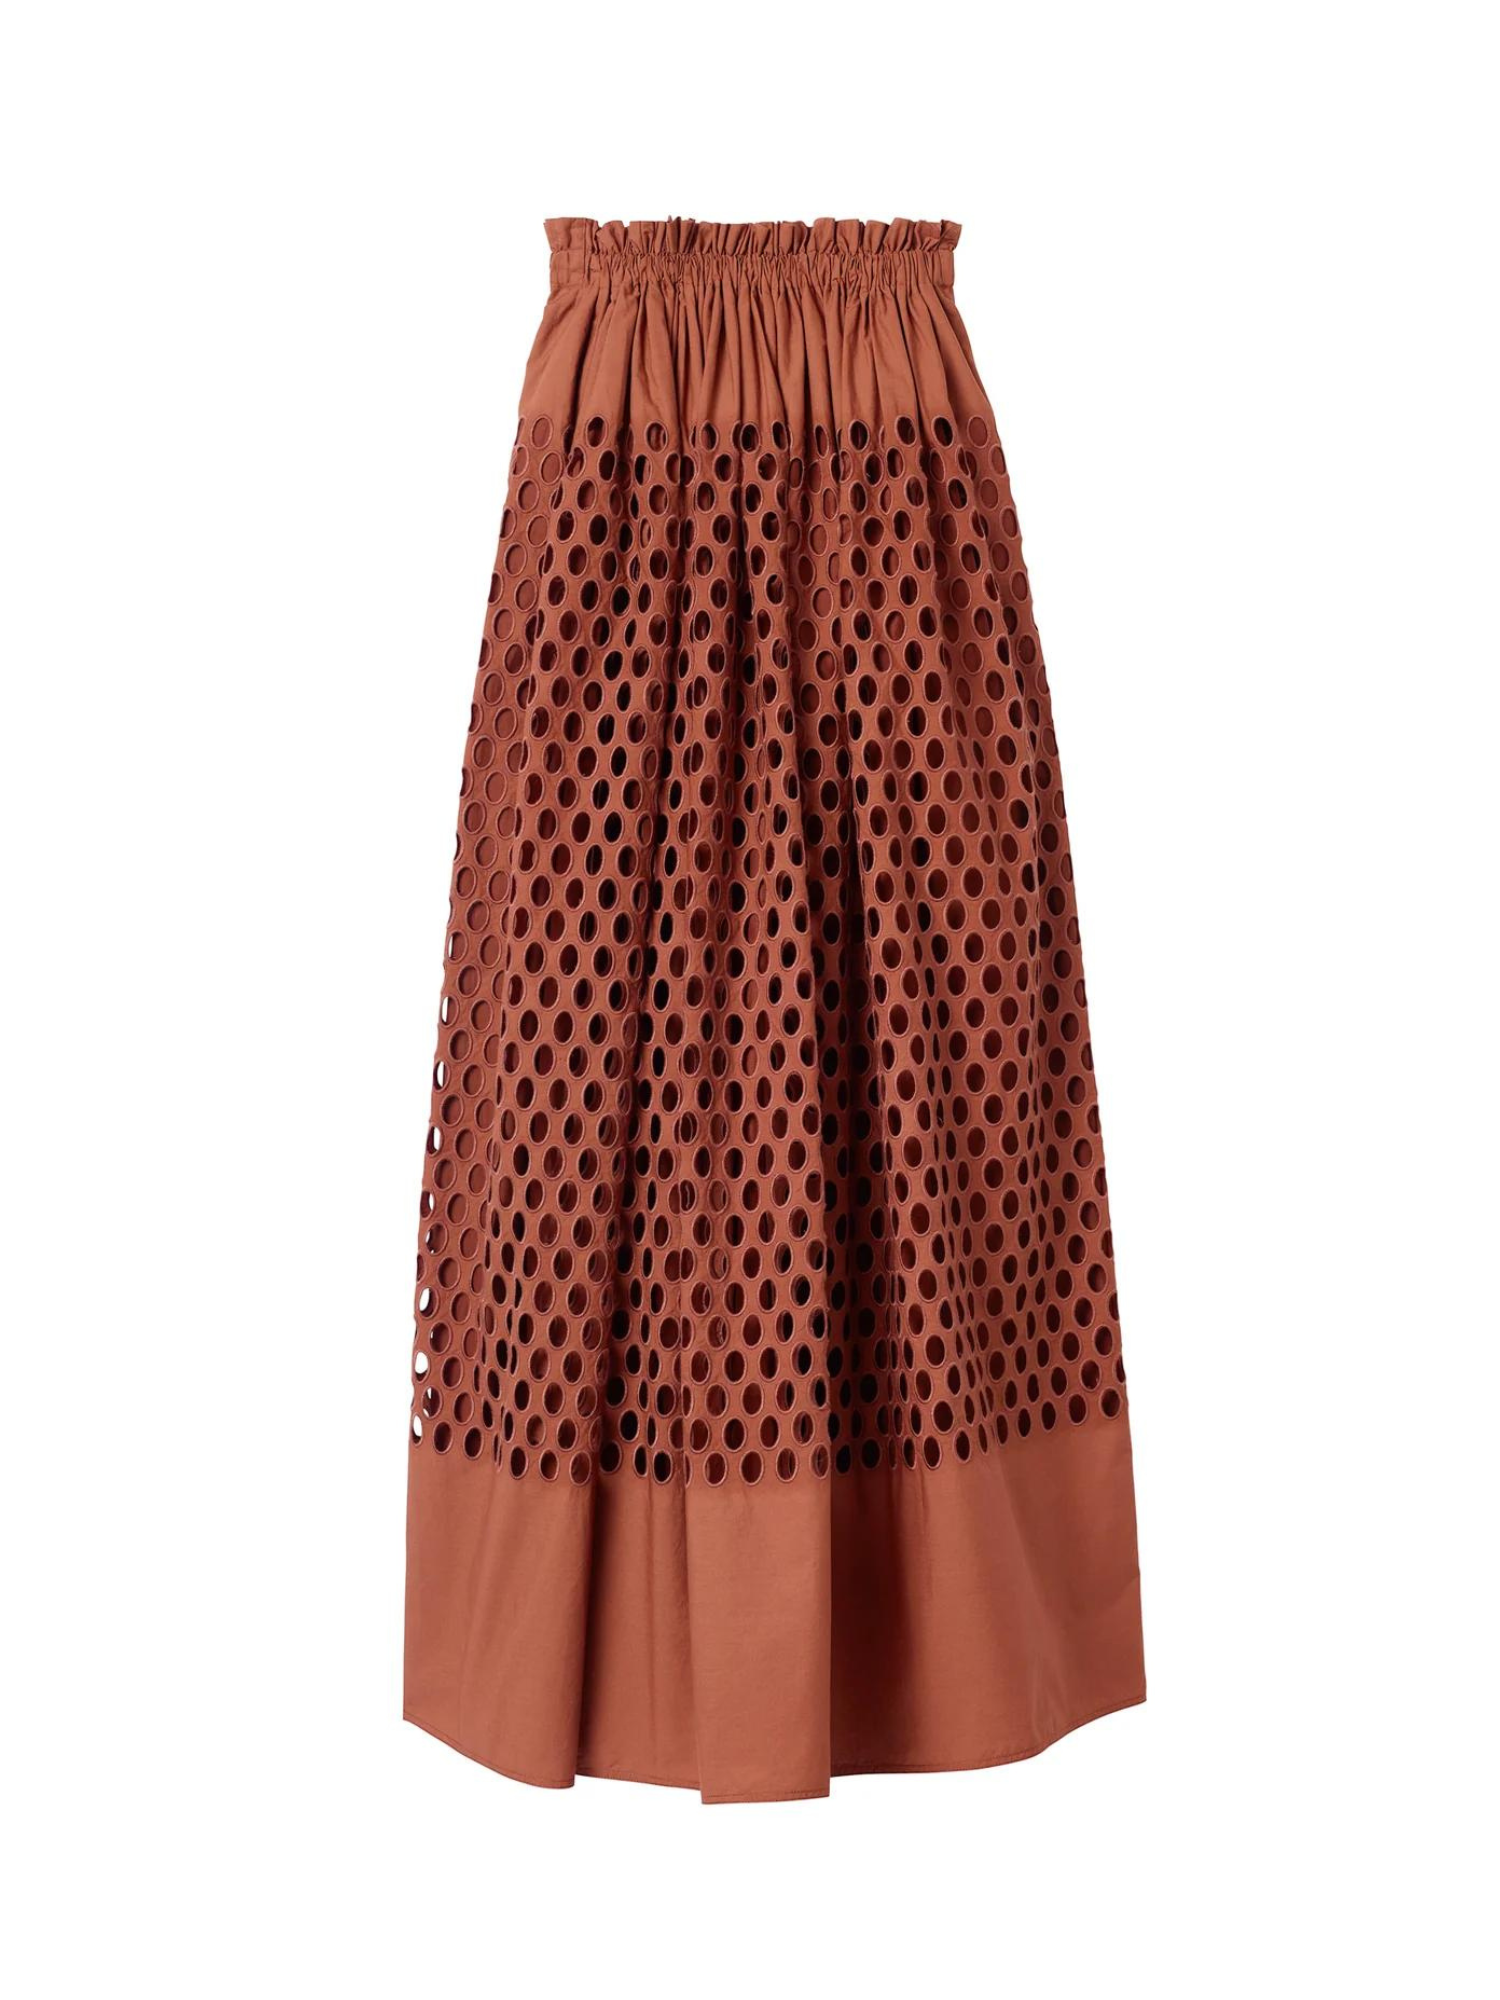 A.L.C. Flora Skirt in Sequoia